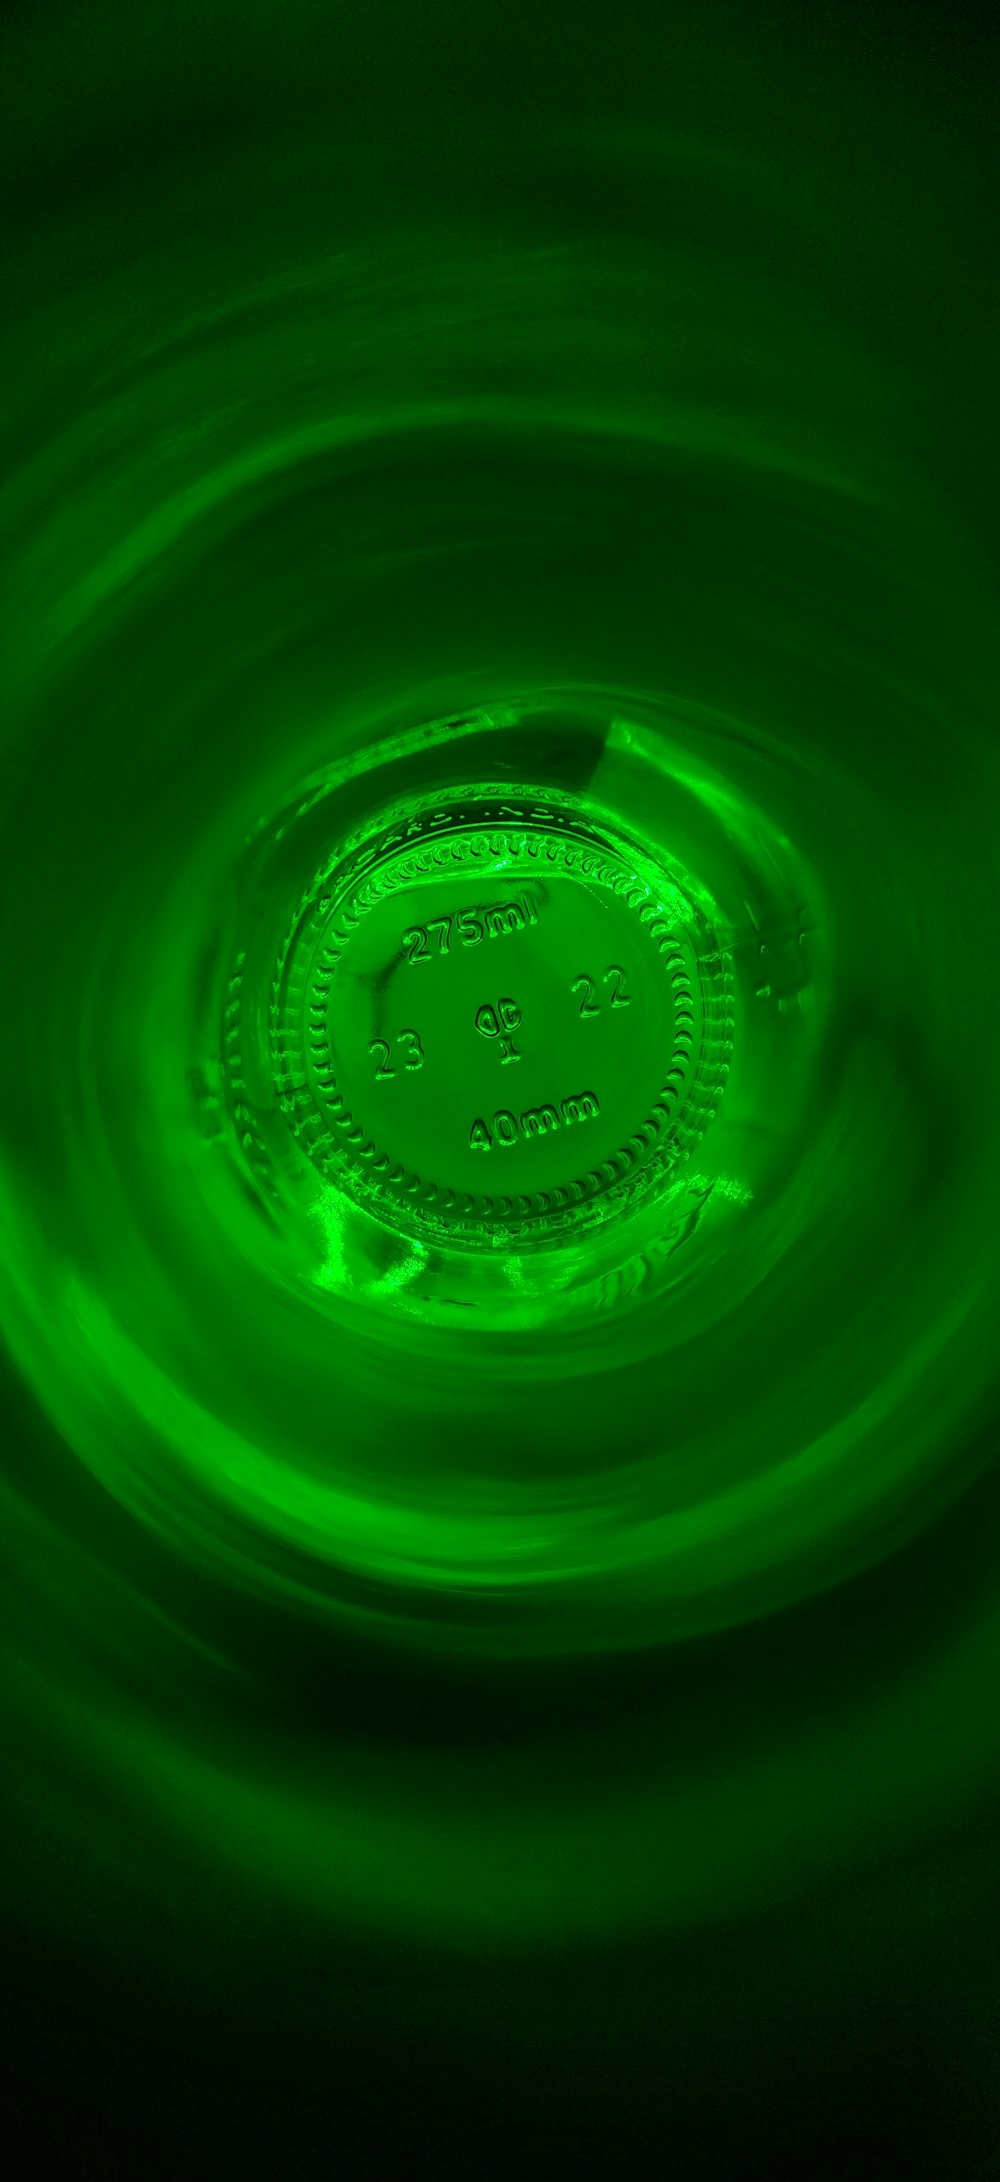 a green circular object in the middle of water